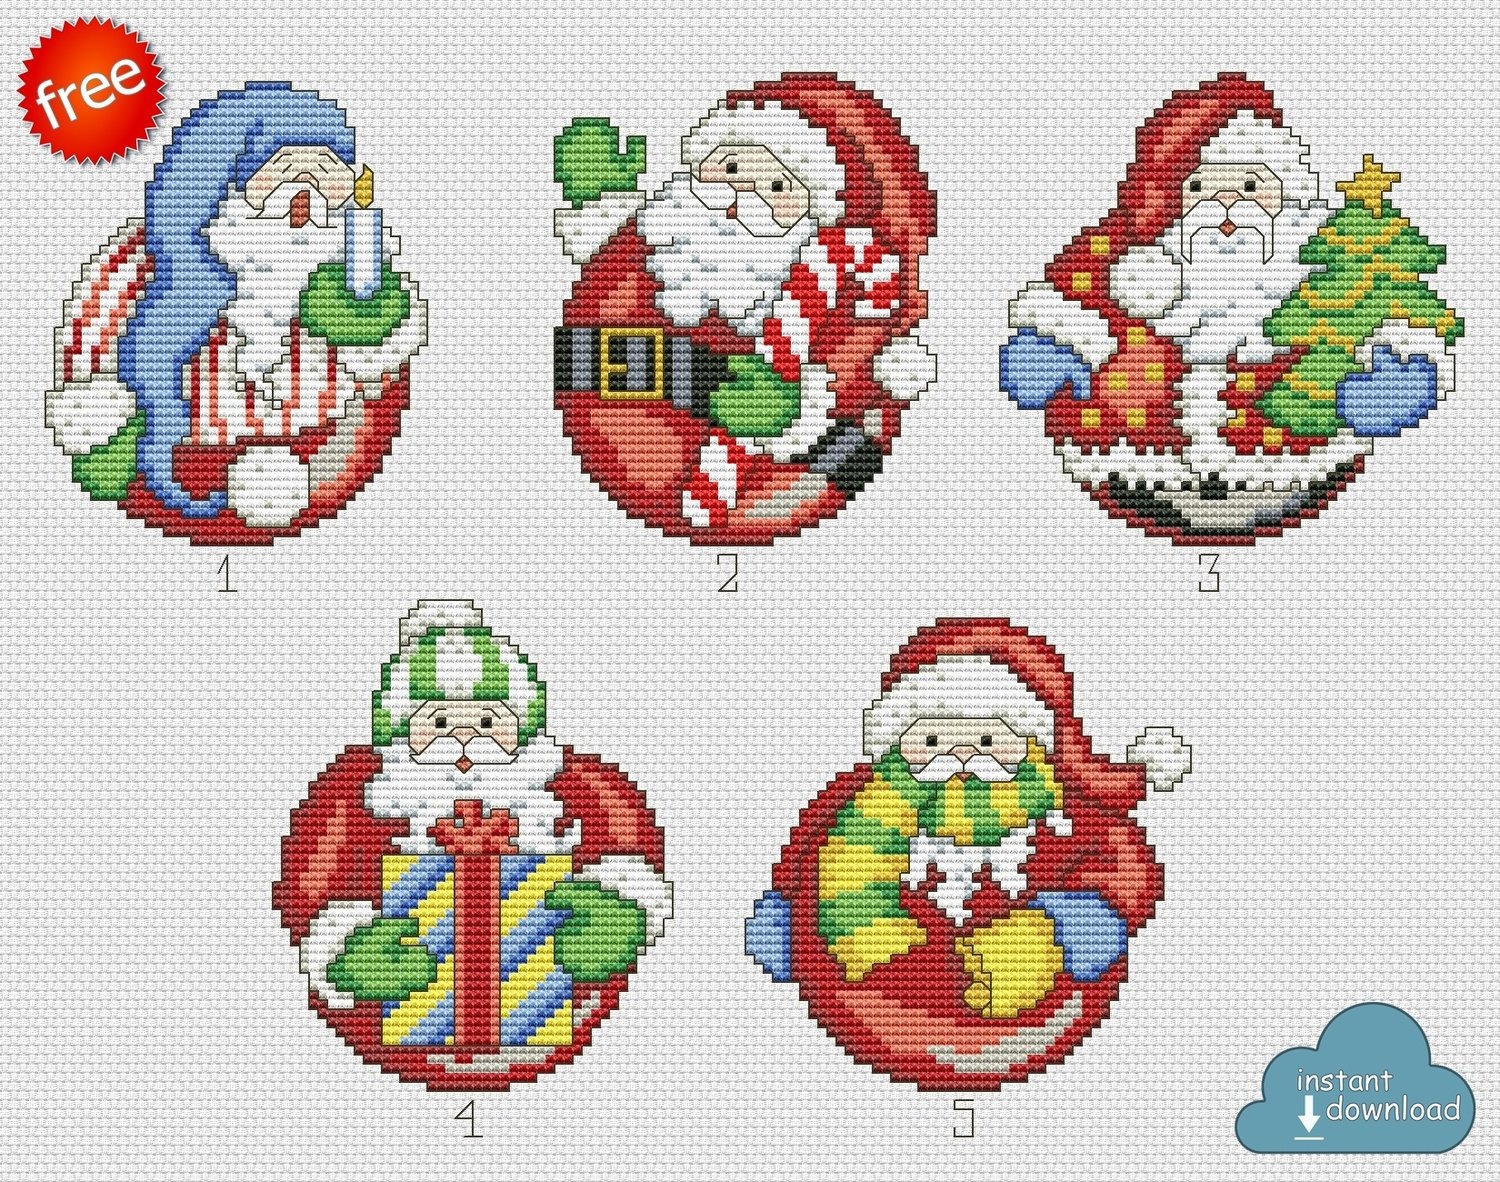 Cross Stitch Charts To Download